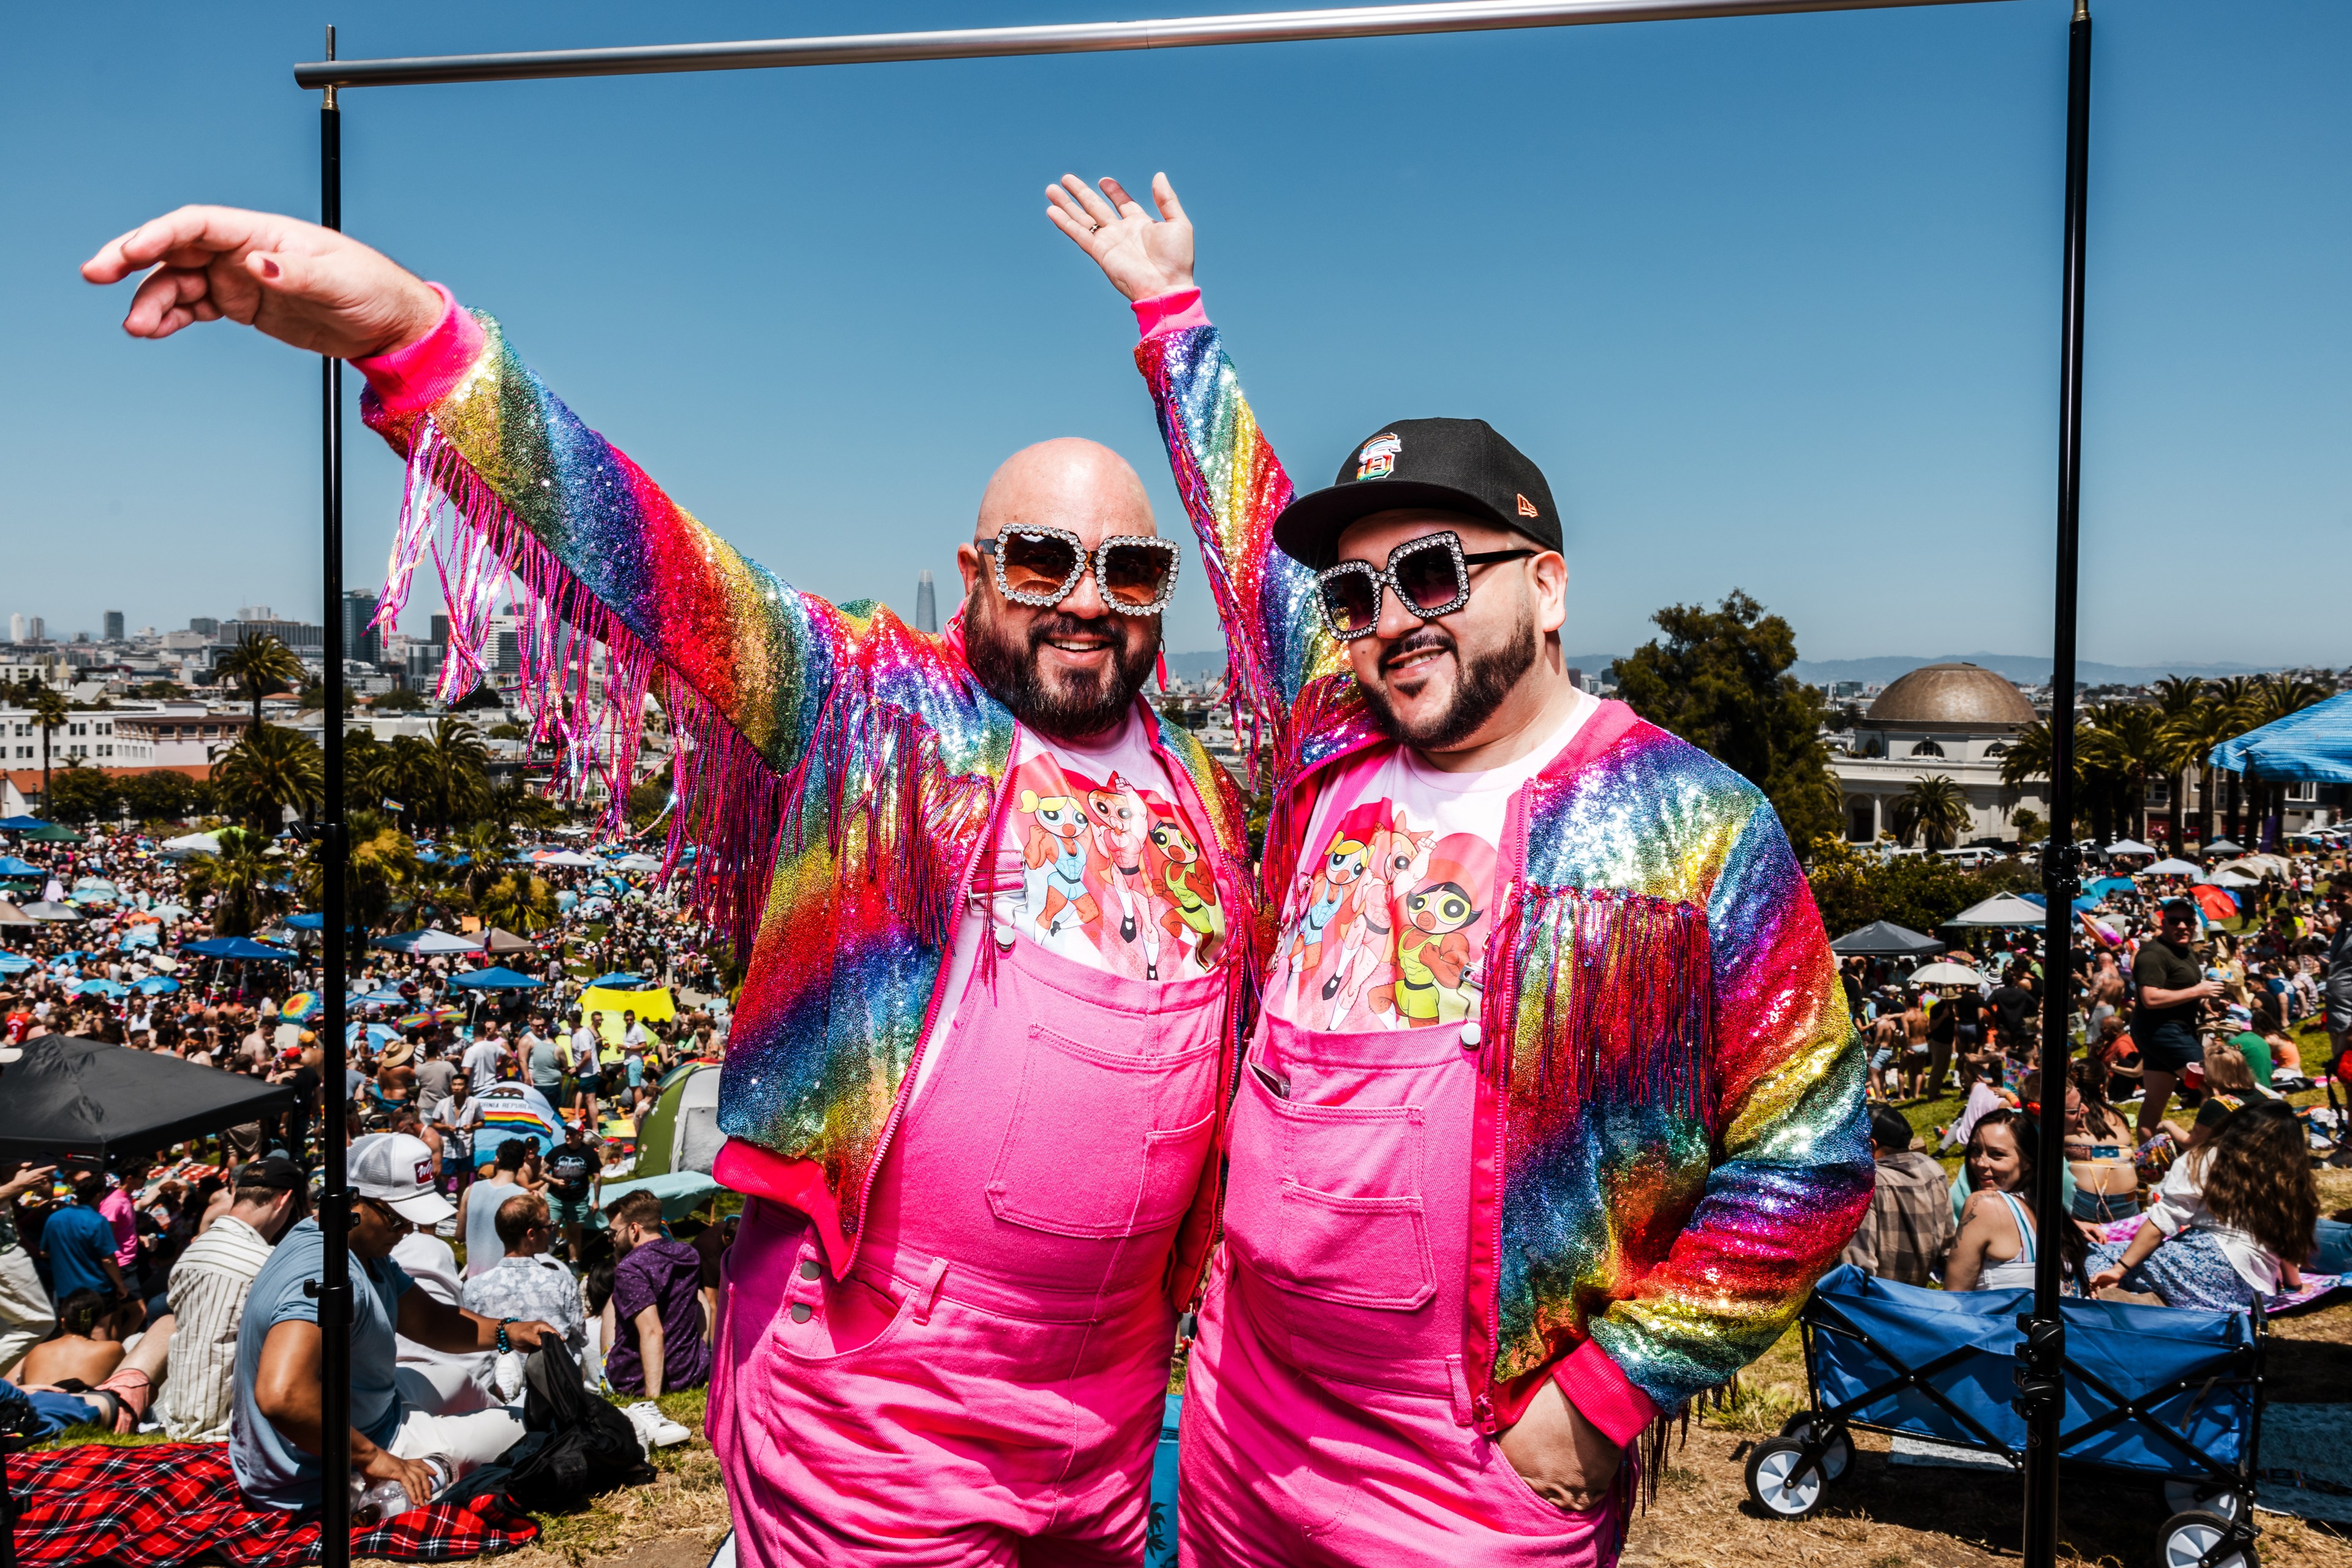 Two smiling men in matching colorful, sequined jackets and pink overalls pose joyfully with arms raised. They wear large sunglasses. A lively outdoor crowd is in the background.